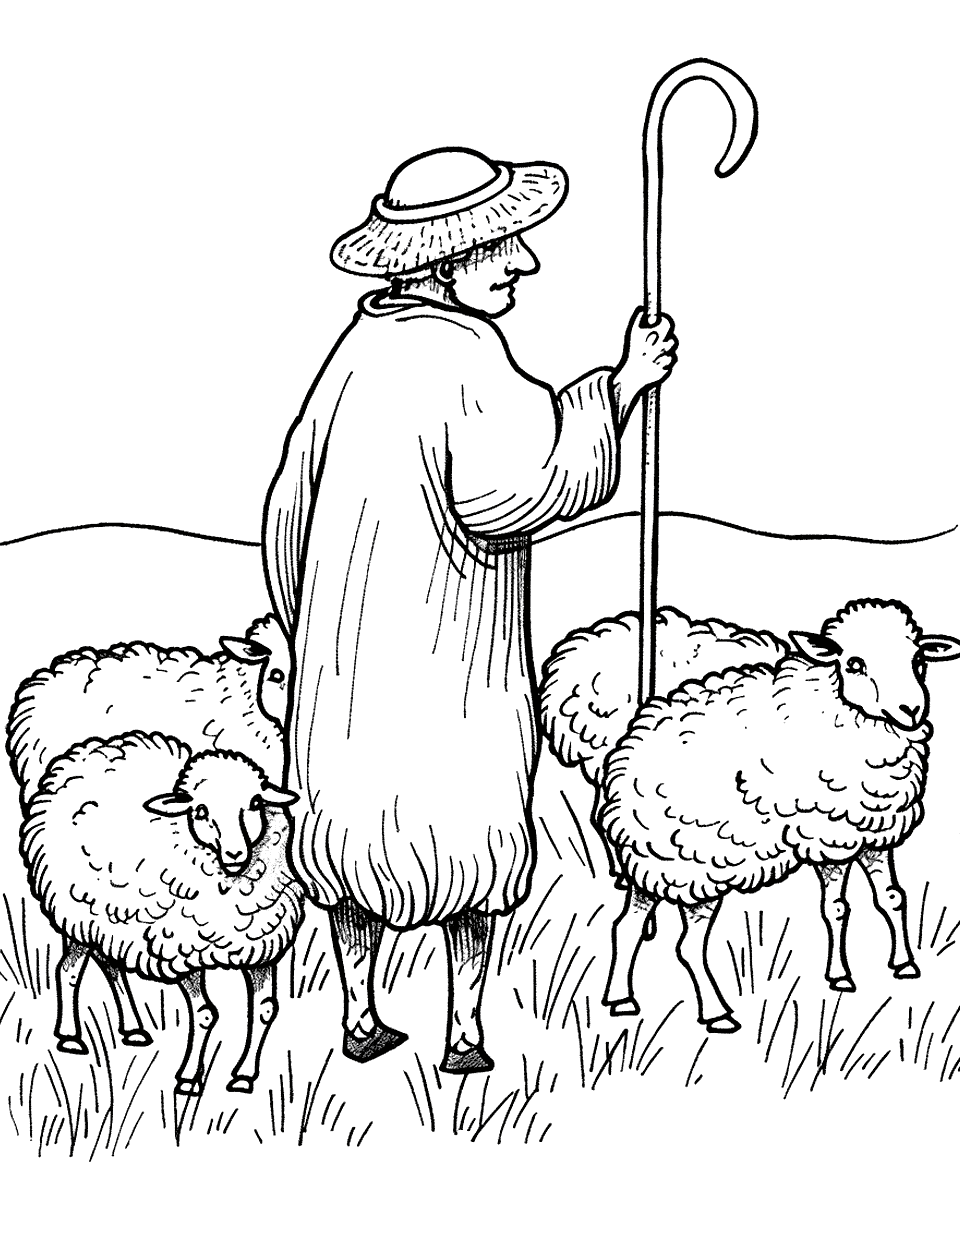 Shepherd with His Flock Sheep Coloring Page - A shepherd standing beside a flock of sheep, holding a staff.